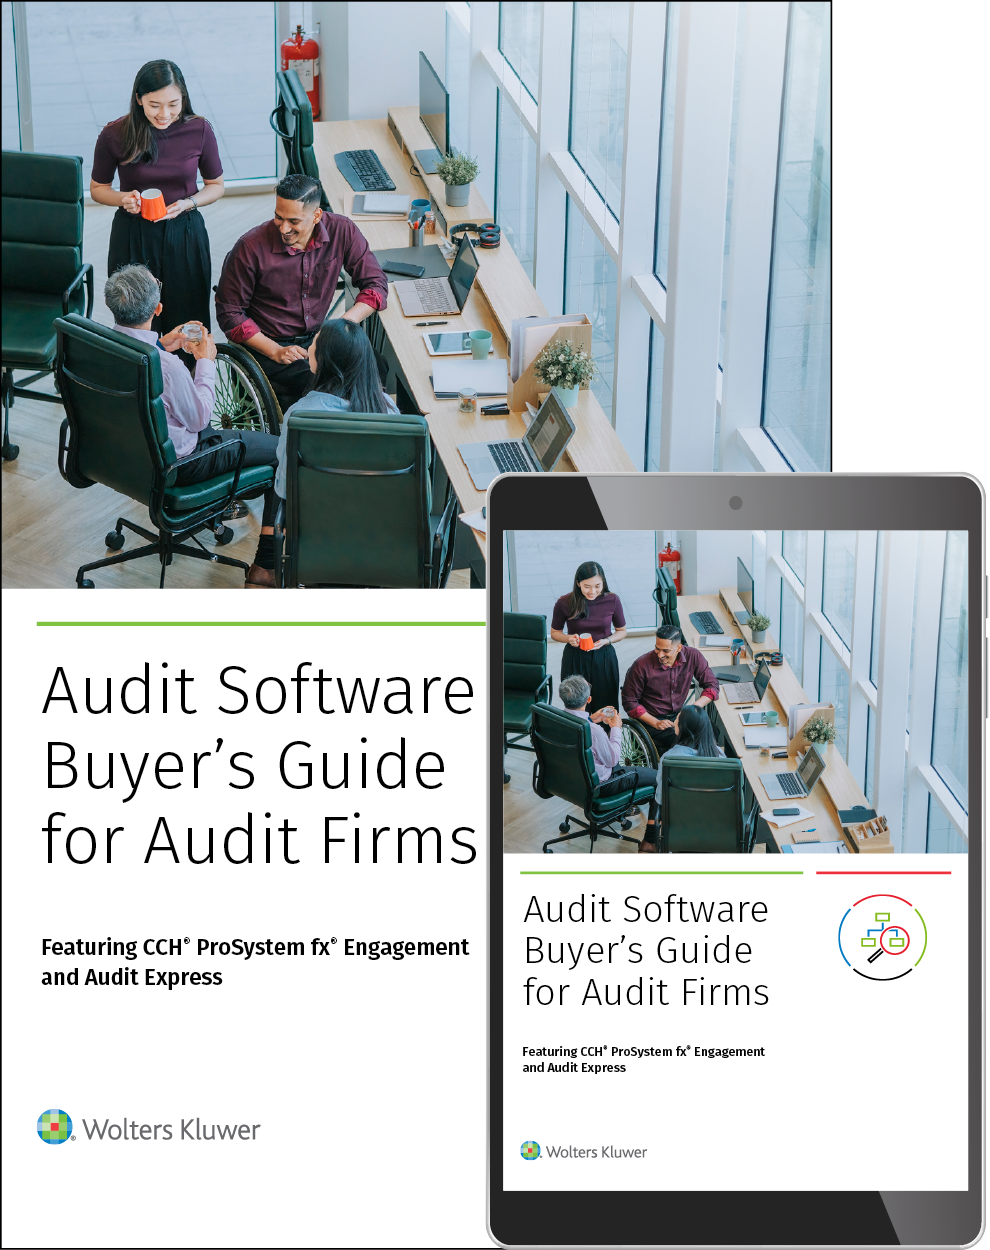 Image of Audit Software Buyer's Guide for Audit Firms PDF cover, also shown on tablet